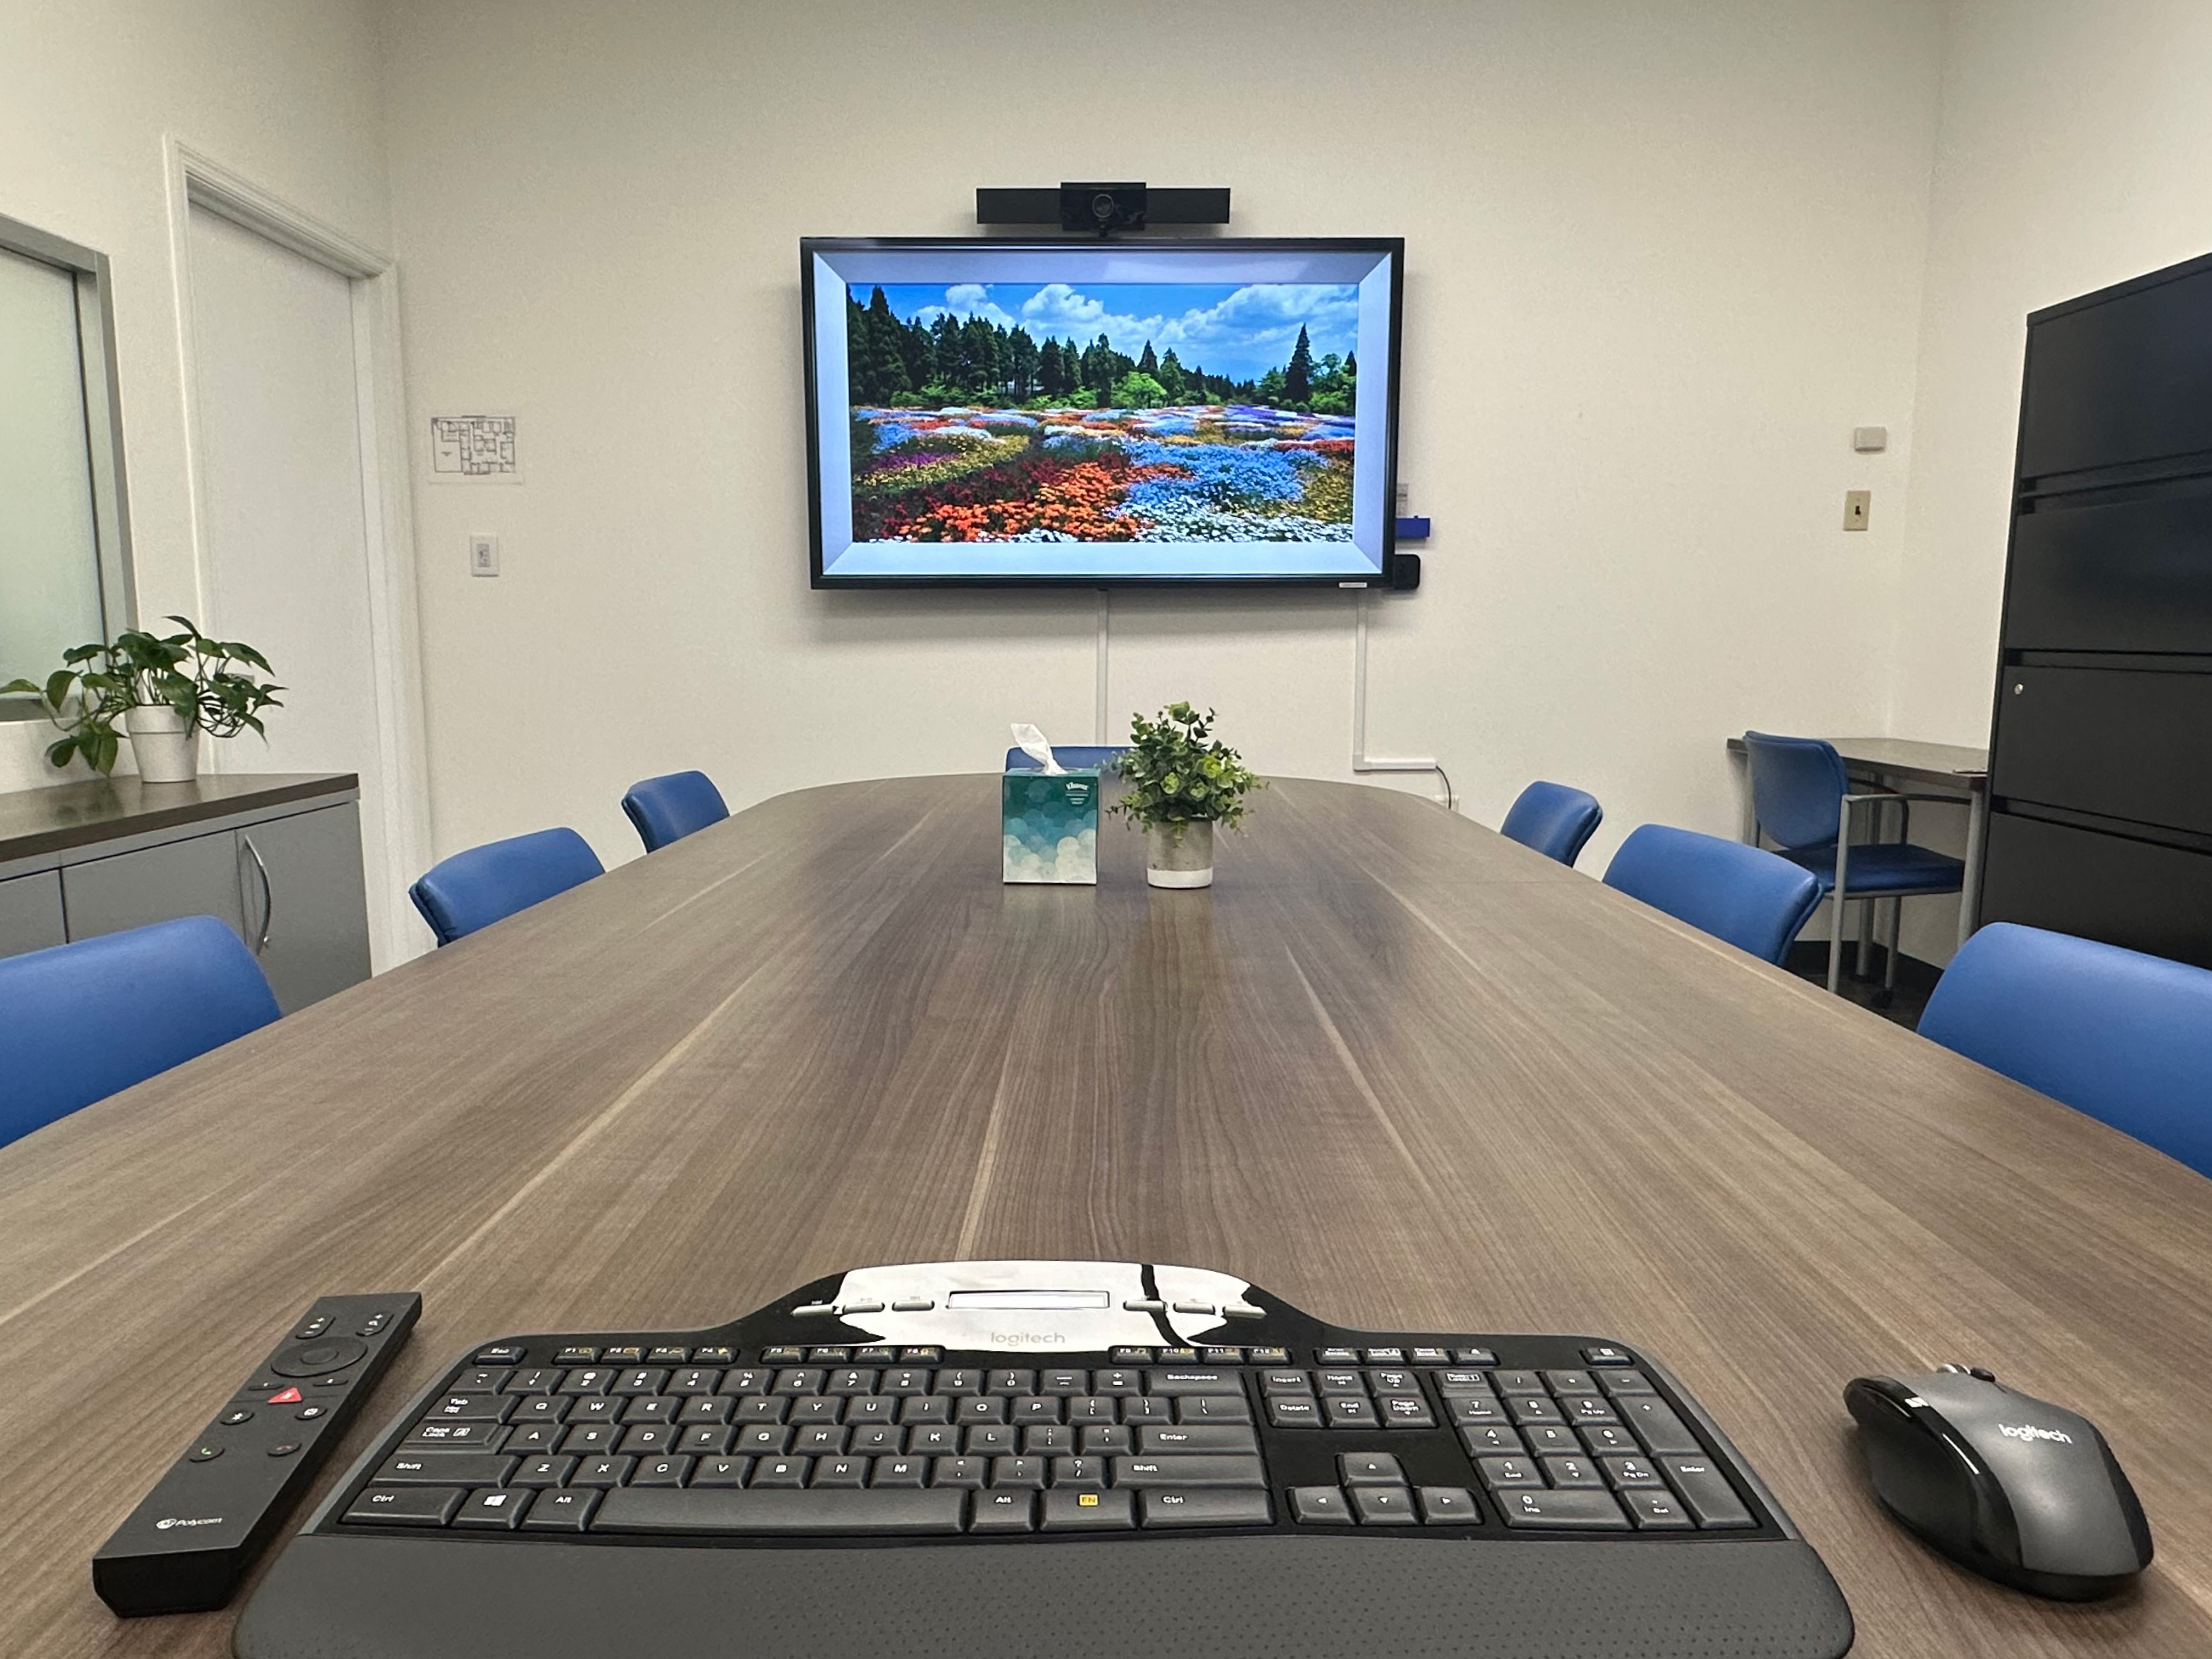 Conference room with monitor, keyboard, and presentation tools